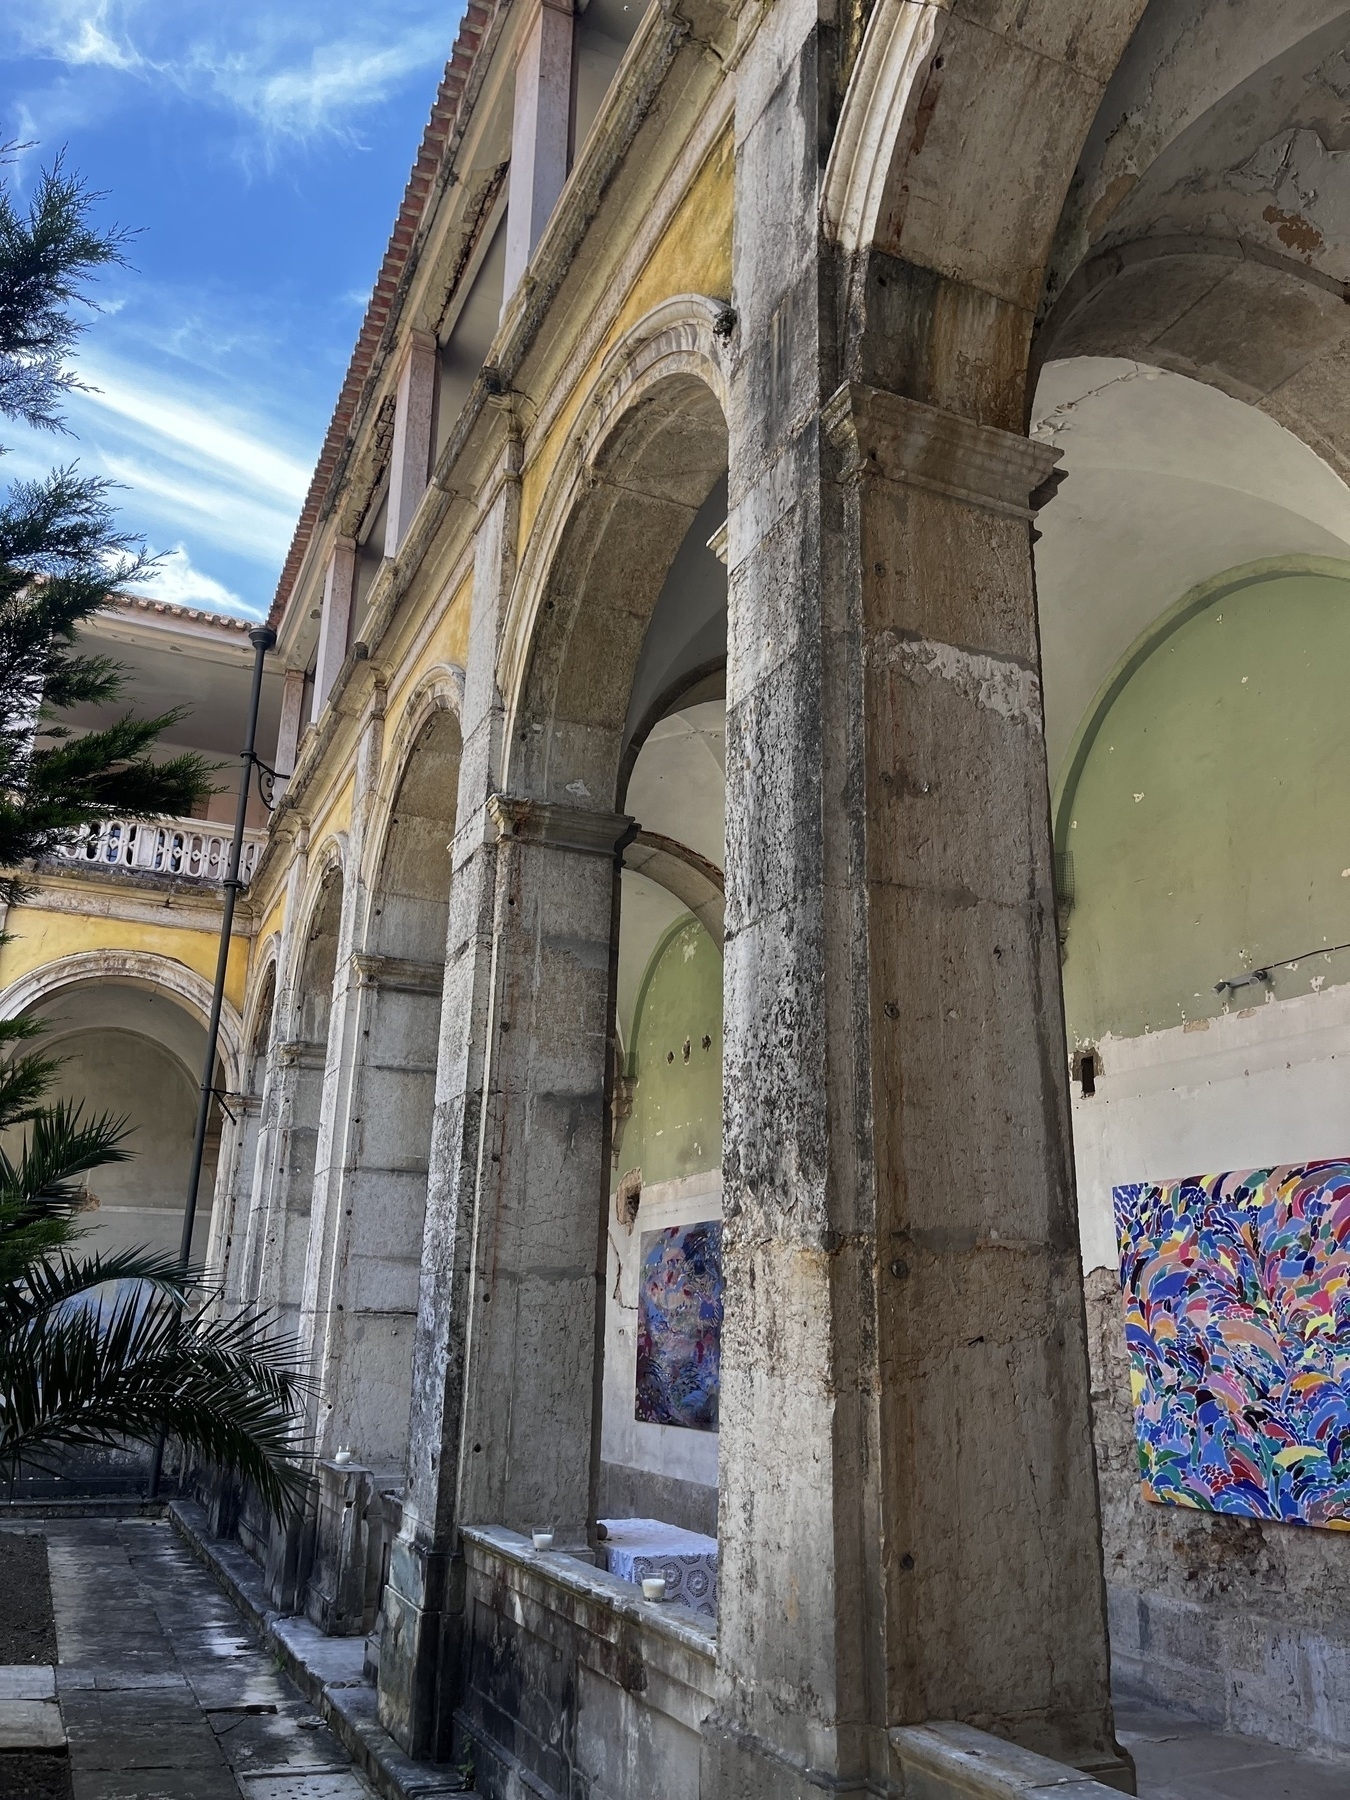 A cloister in the Estrela Basilica showing arches, part of the garden and some paintings from an exhibition